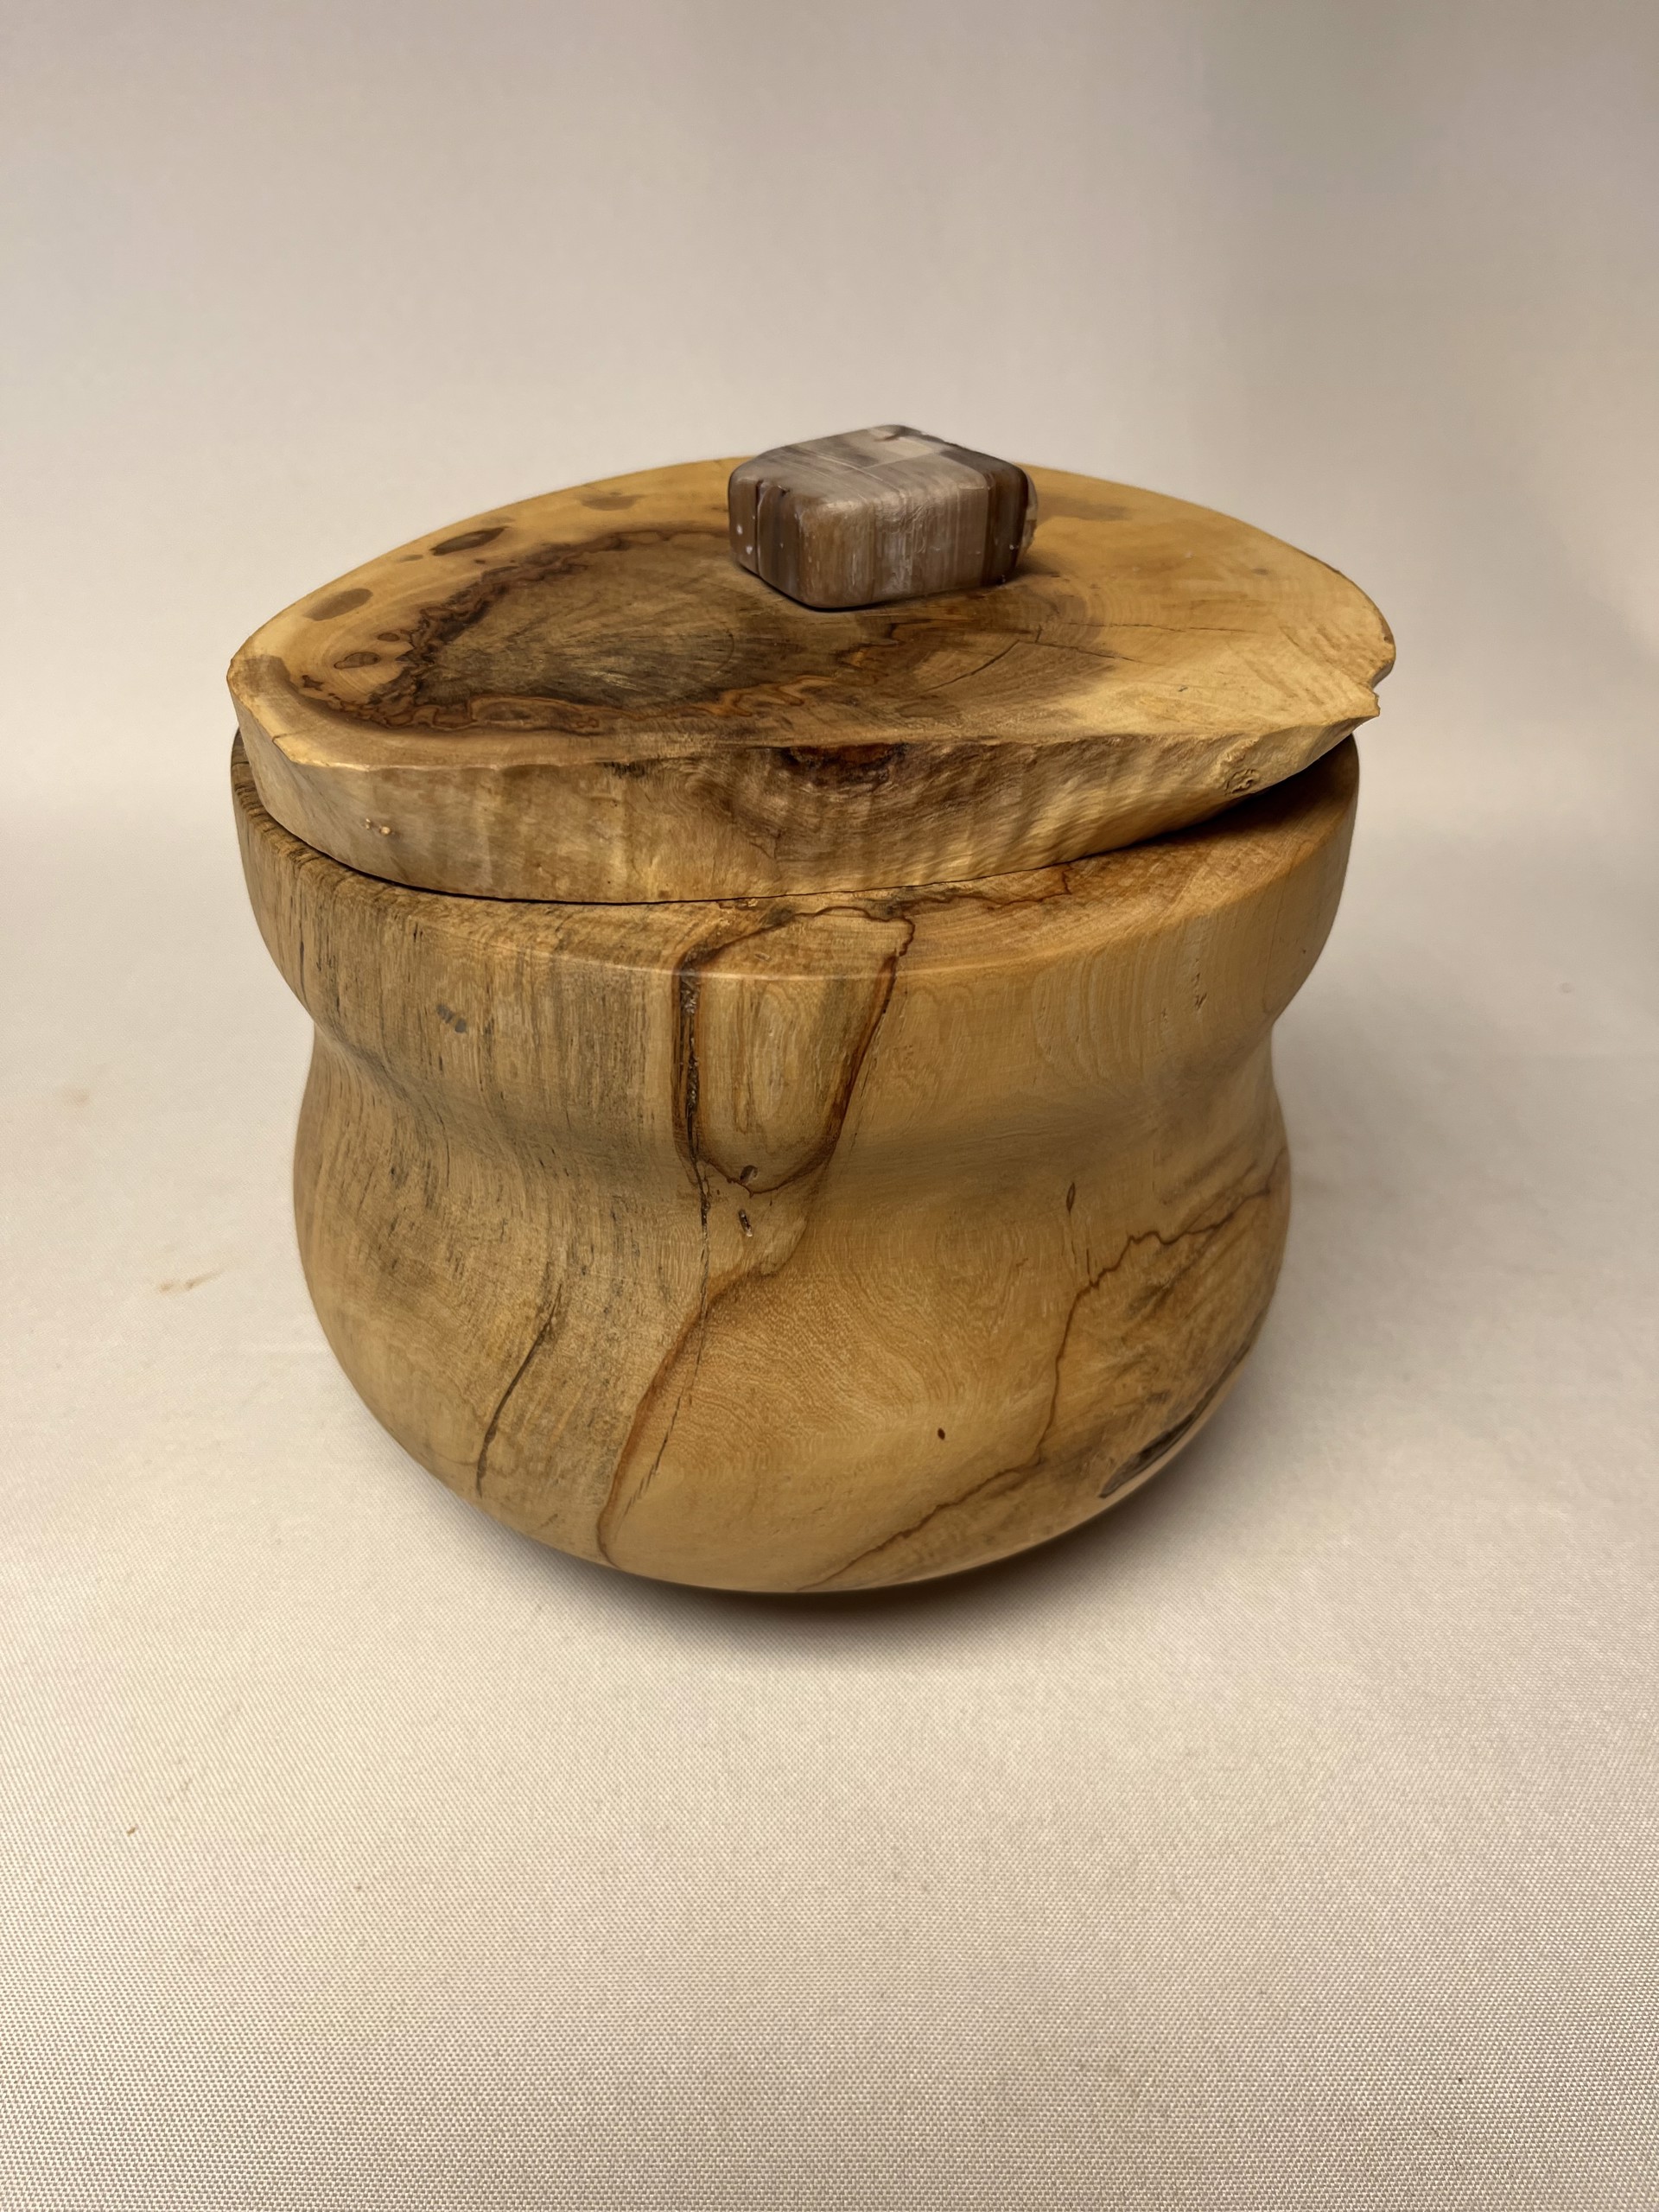 Turned Wood Jar W/Lid #17-11 by Rick Squires